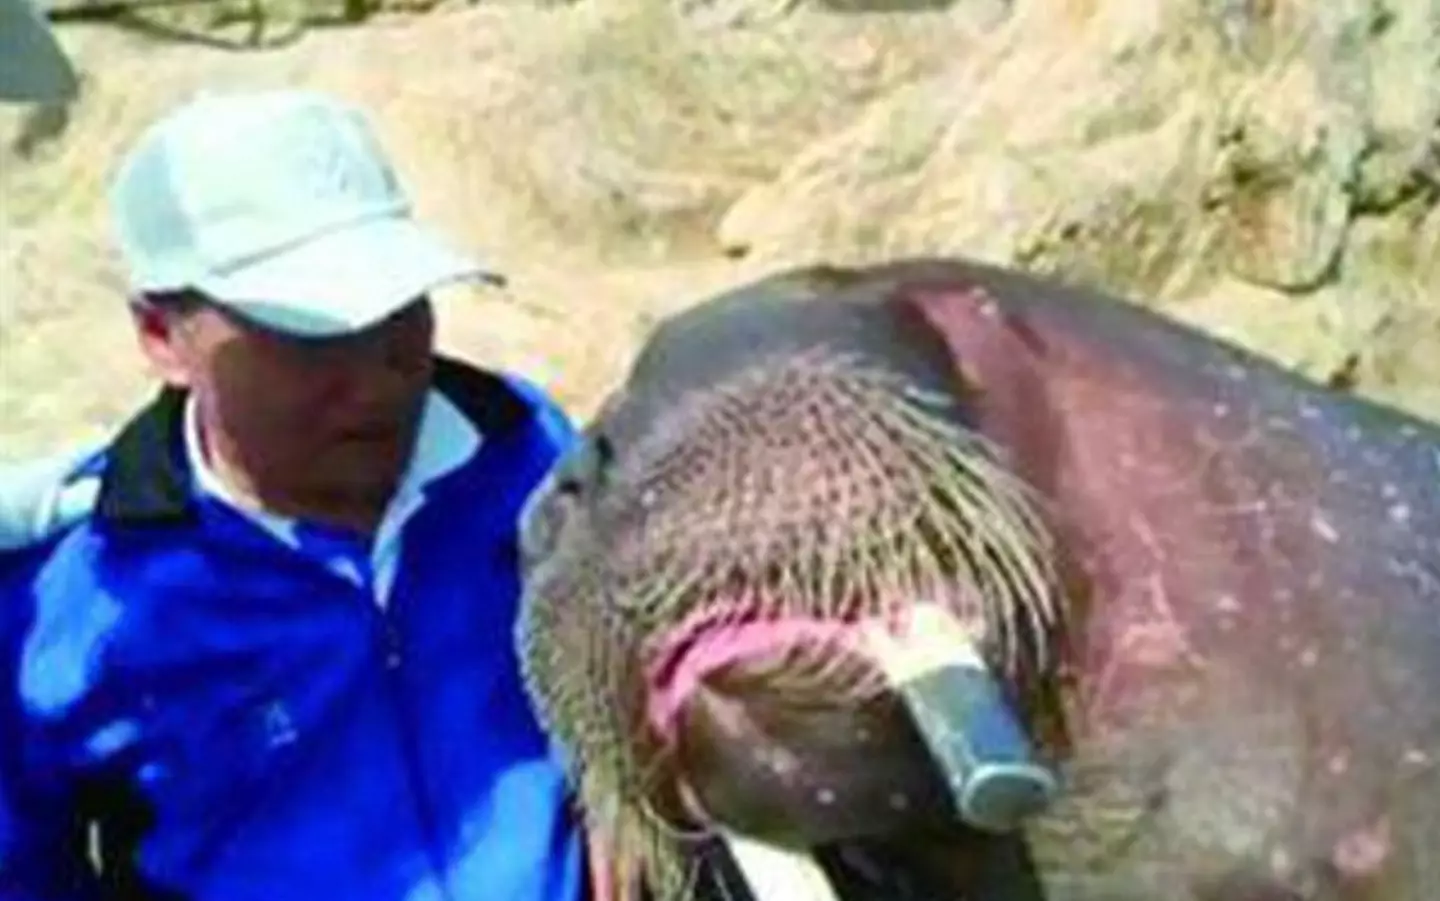 Jia Lijun died after taking a photo with the walrus.